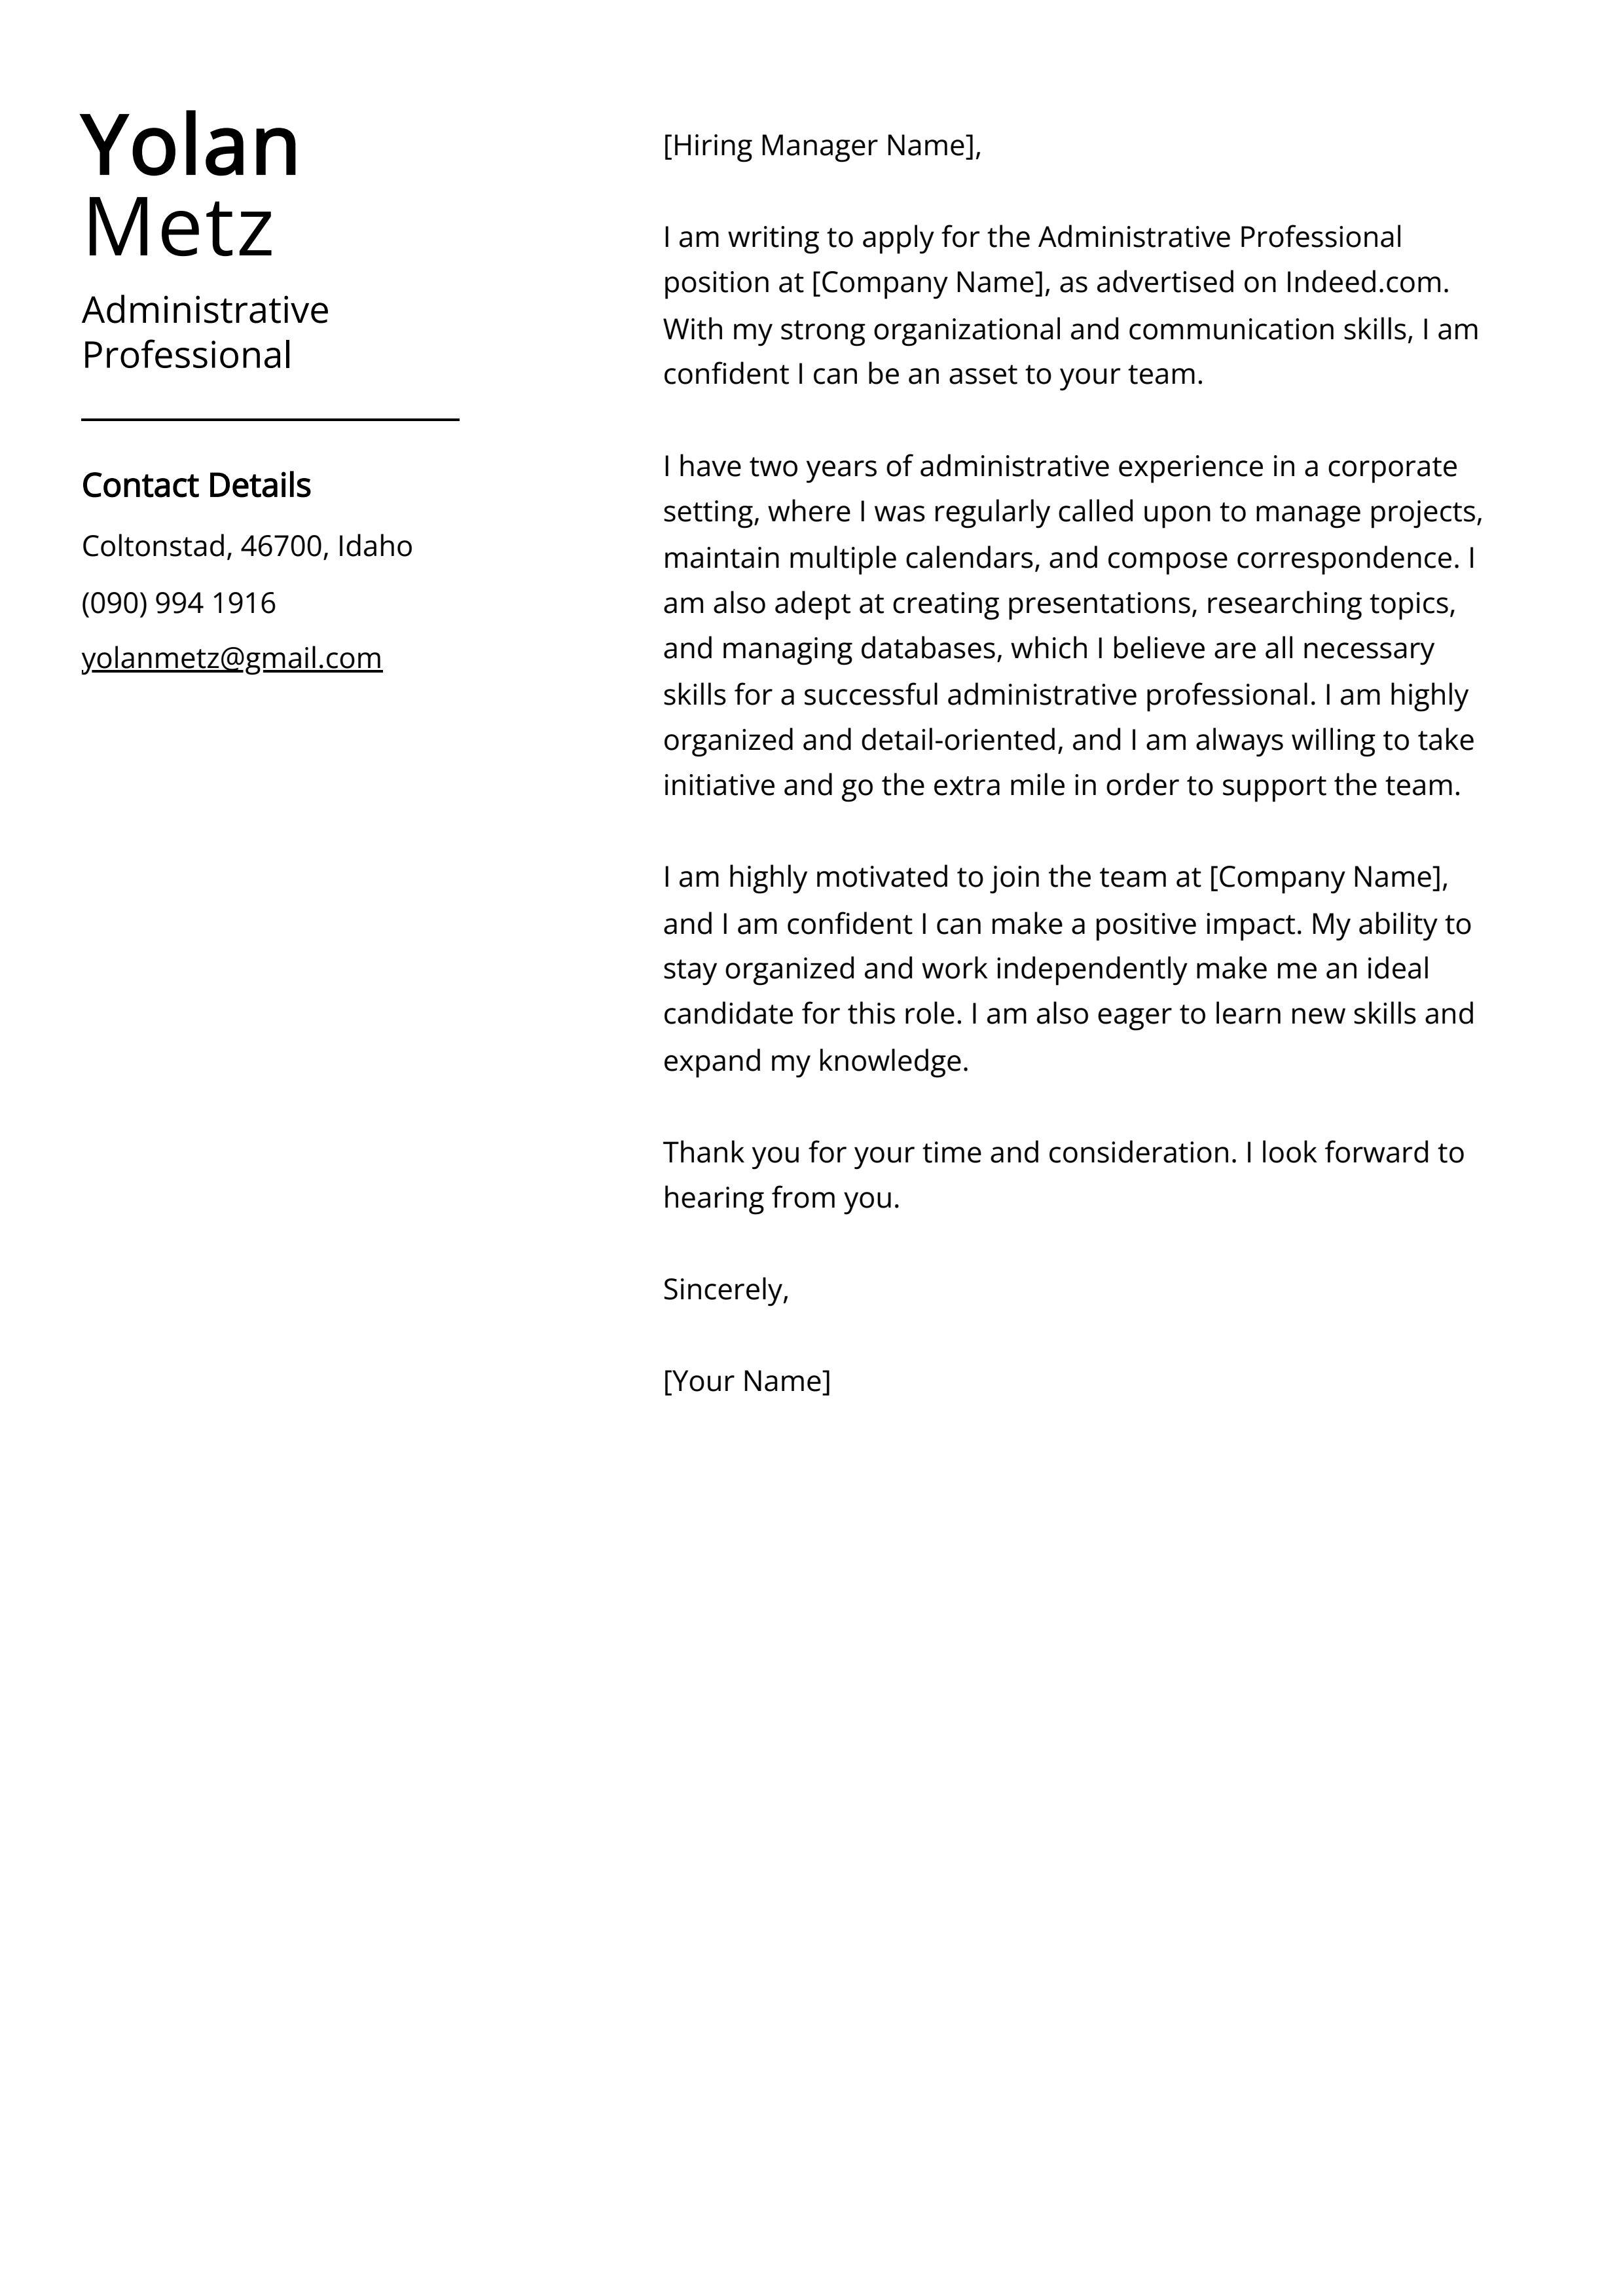 Administrative Professional Cover Letter Example